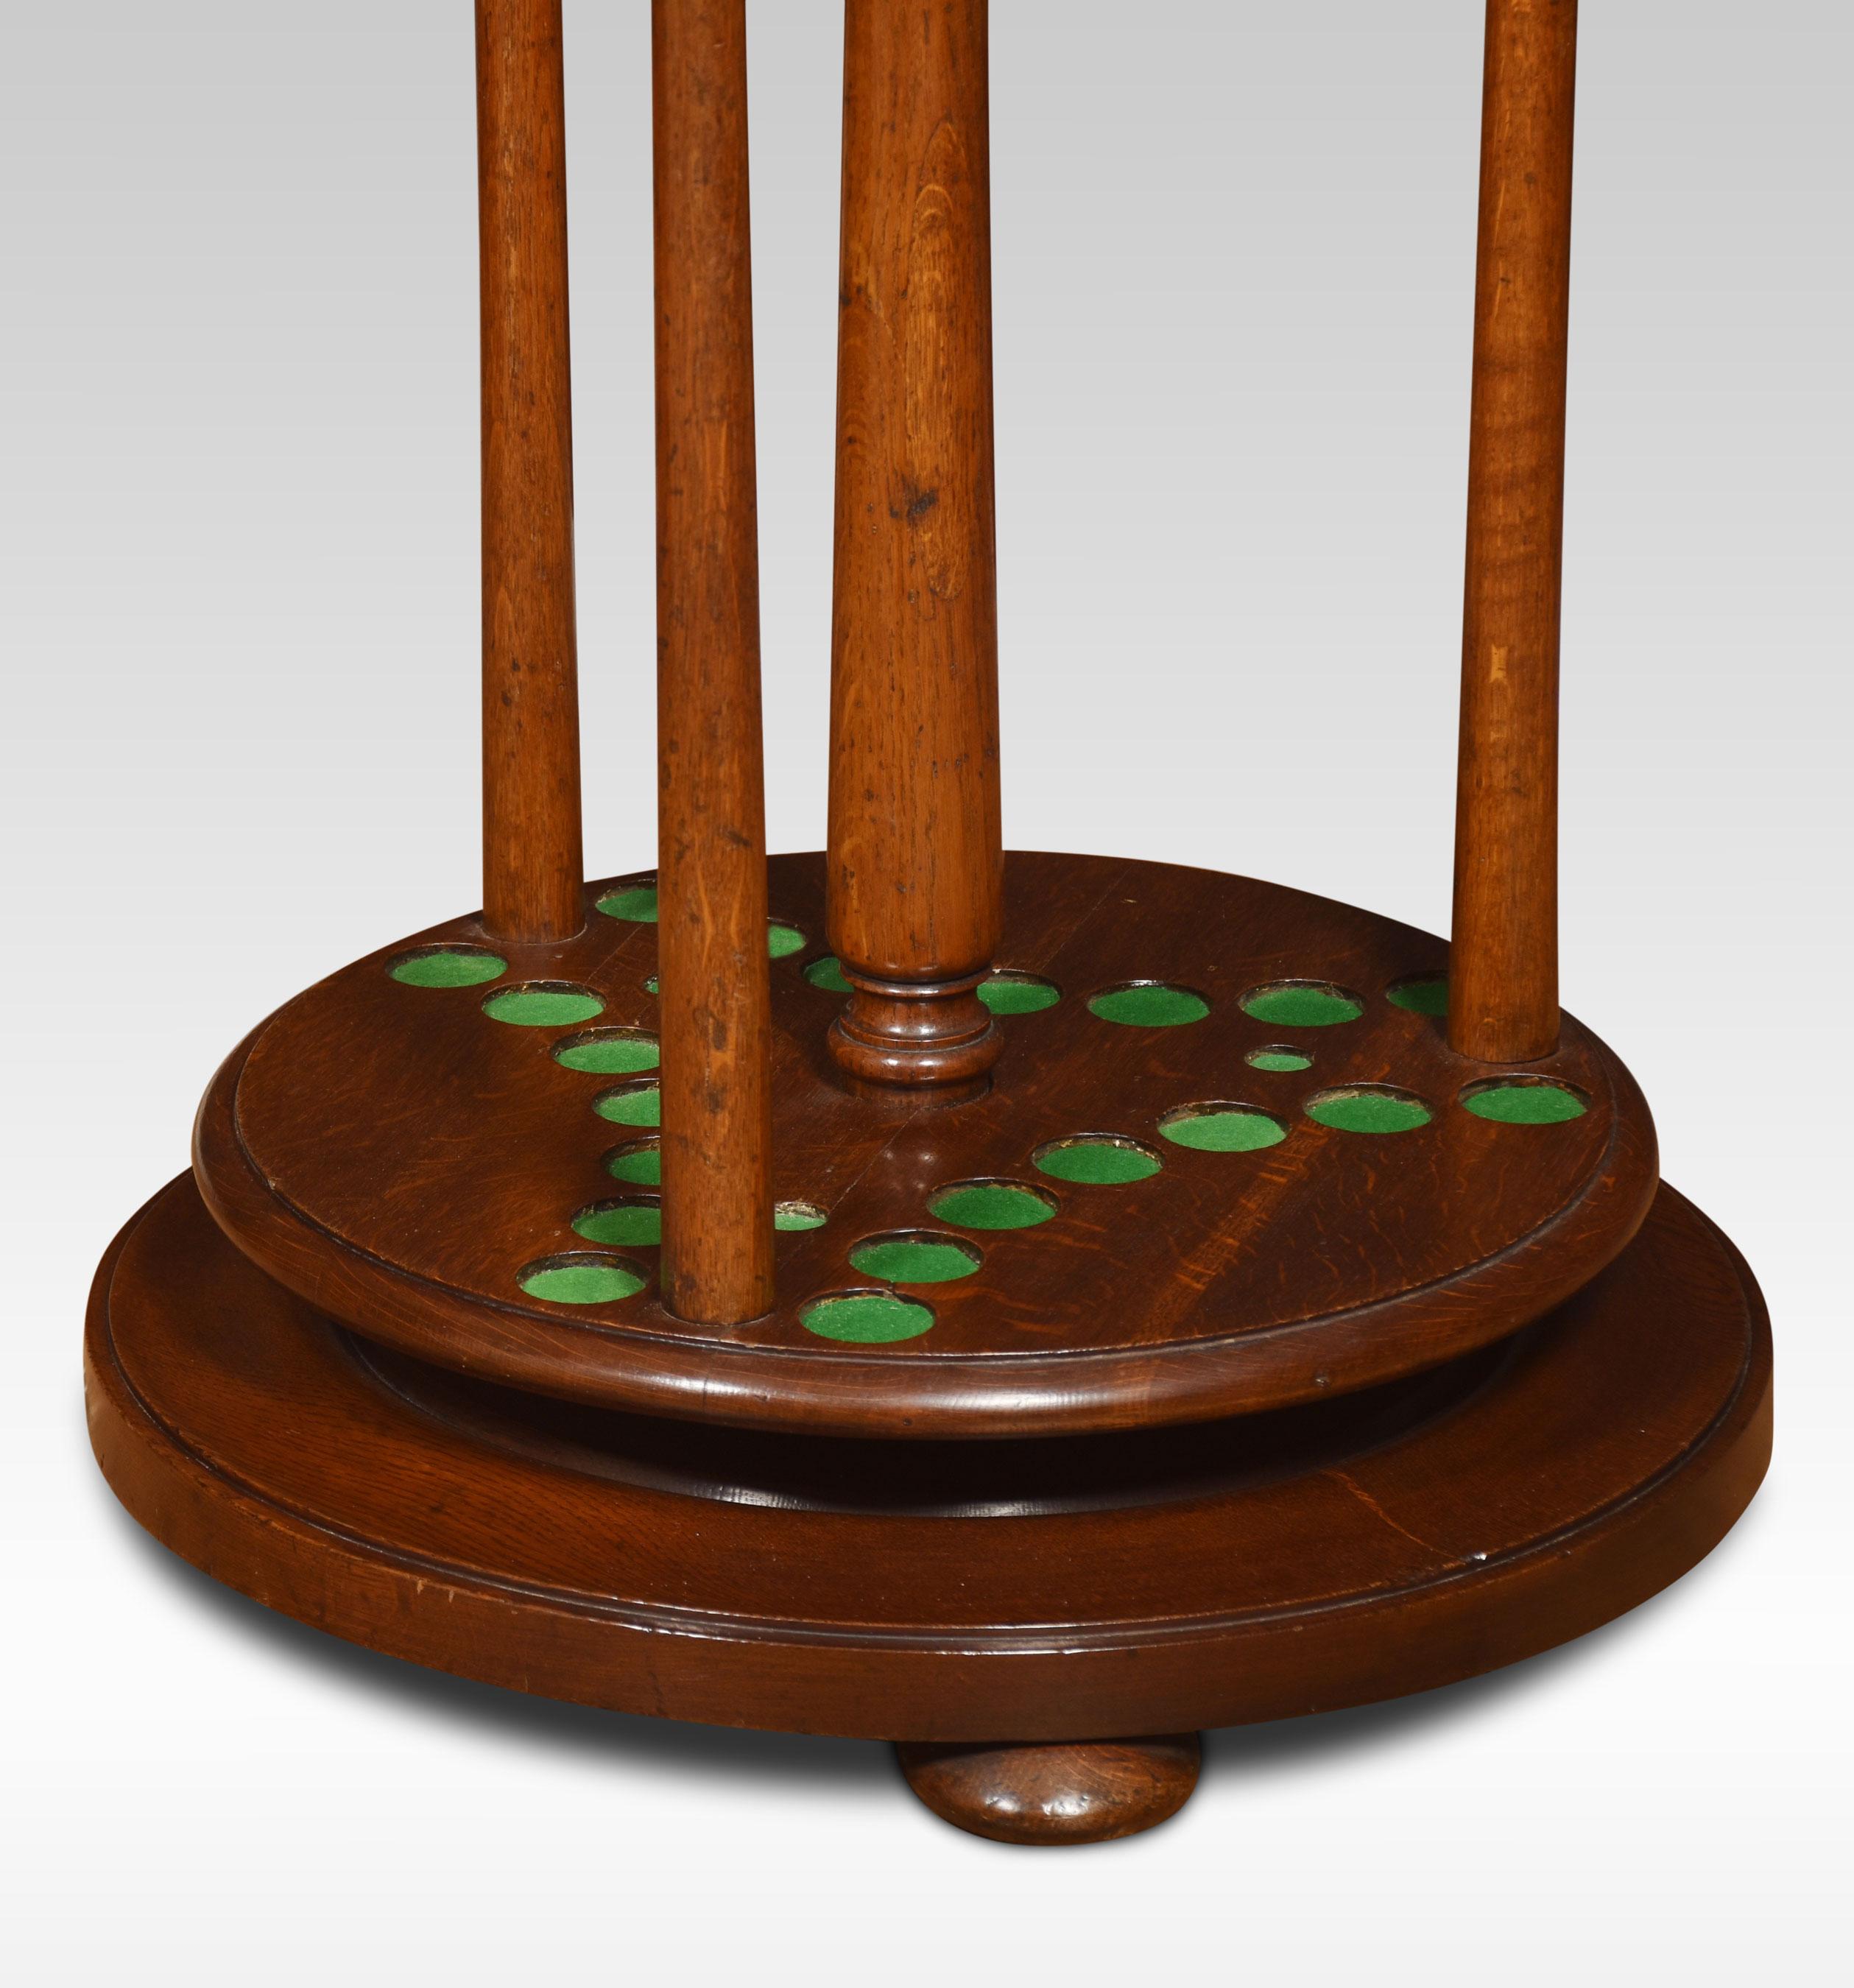 Oak cue stand, having central turned finial above cue rack accommodating 21 cues, all raised up on turned pillars and stepped base terminating in bun feet.
Dimensions
Height 44.5 Inches
Width 24 Inches
Depth 24 Inches.